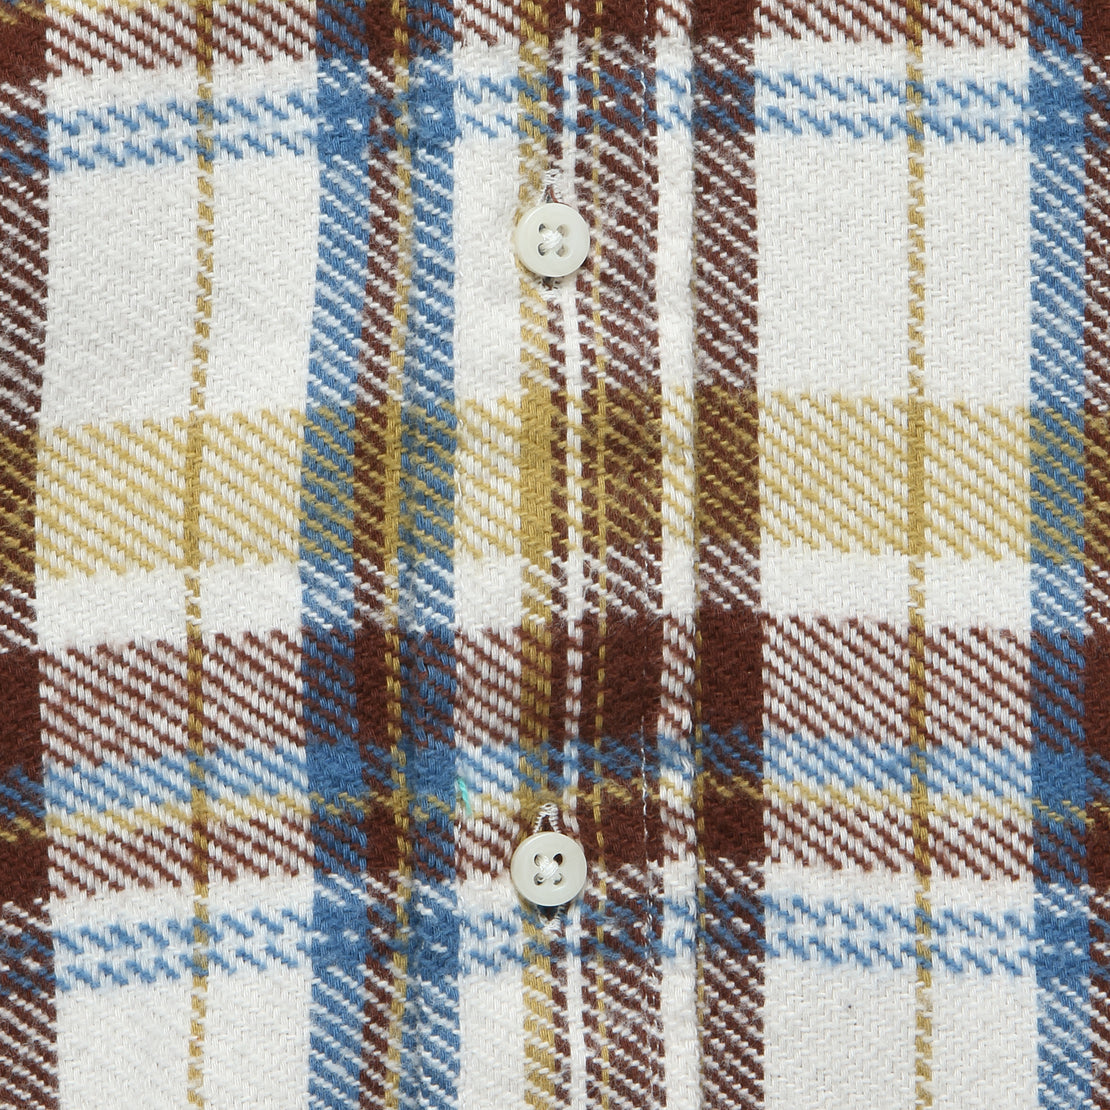 Brushed Triple Yarn Flannel - White - Gitman Vintage - STAG Provisions - Tops - L/S Woven - Plaid